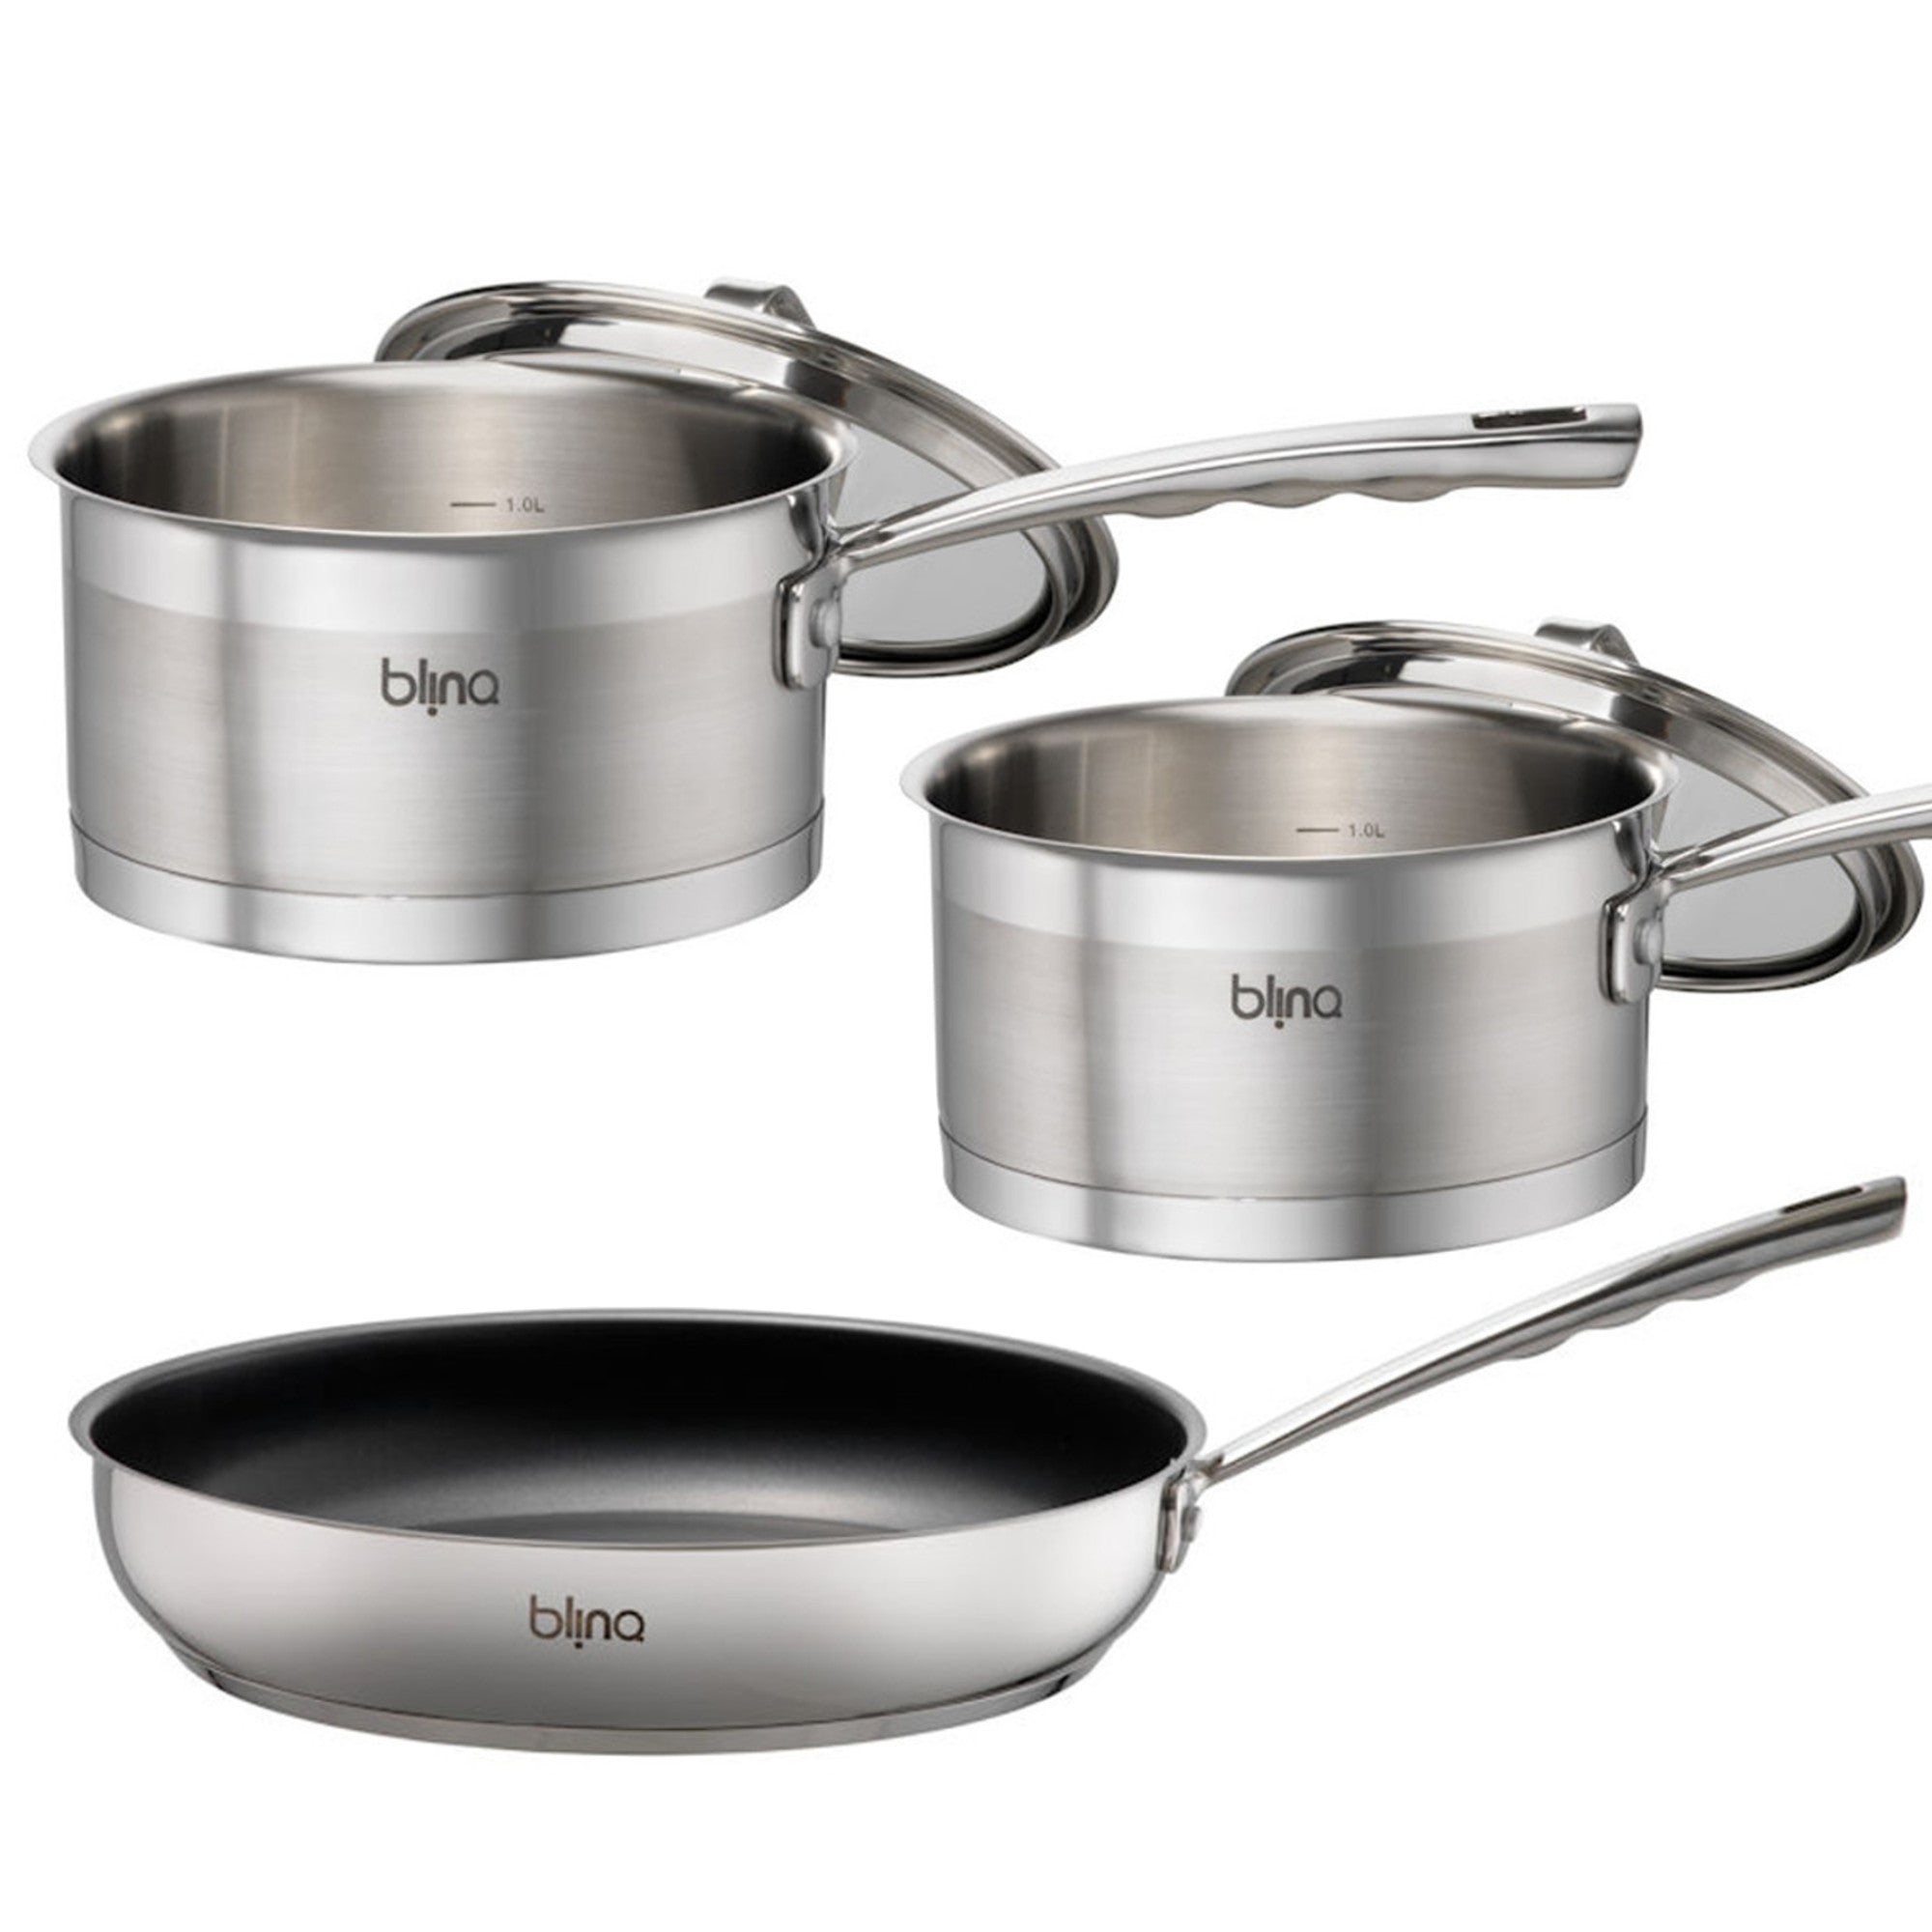 Blinq Gourmet 3pcs Induction Cookware Set -  Stainless Steel